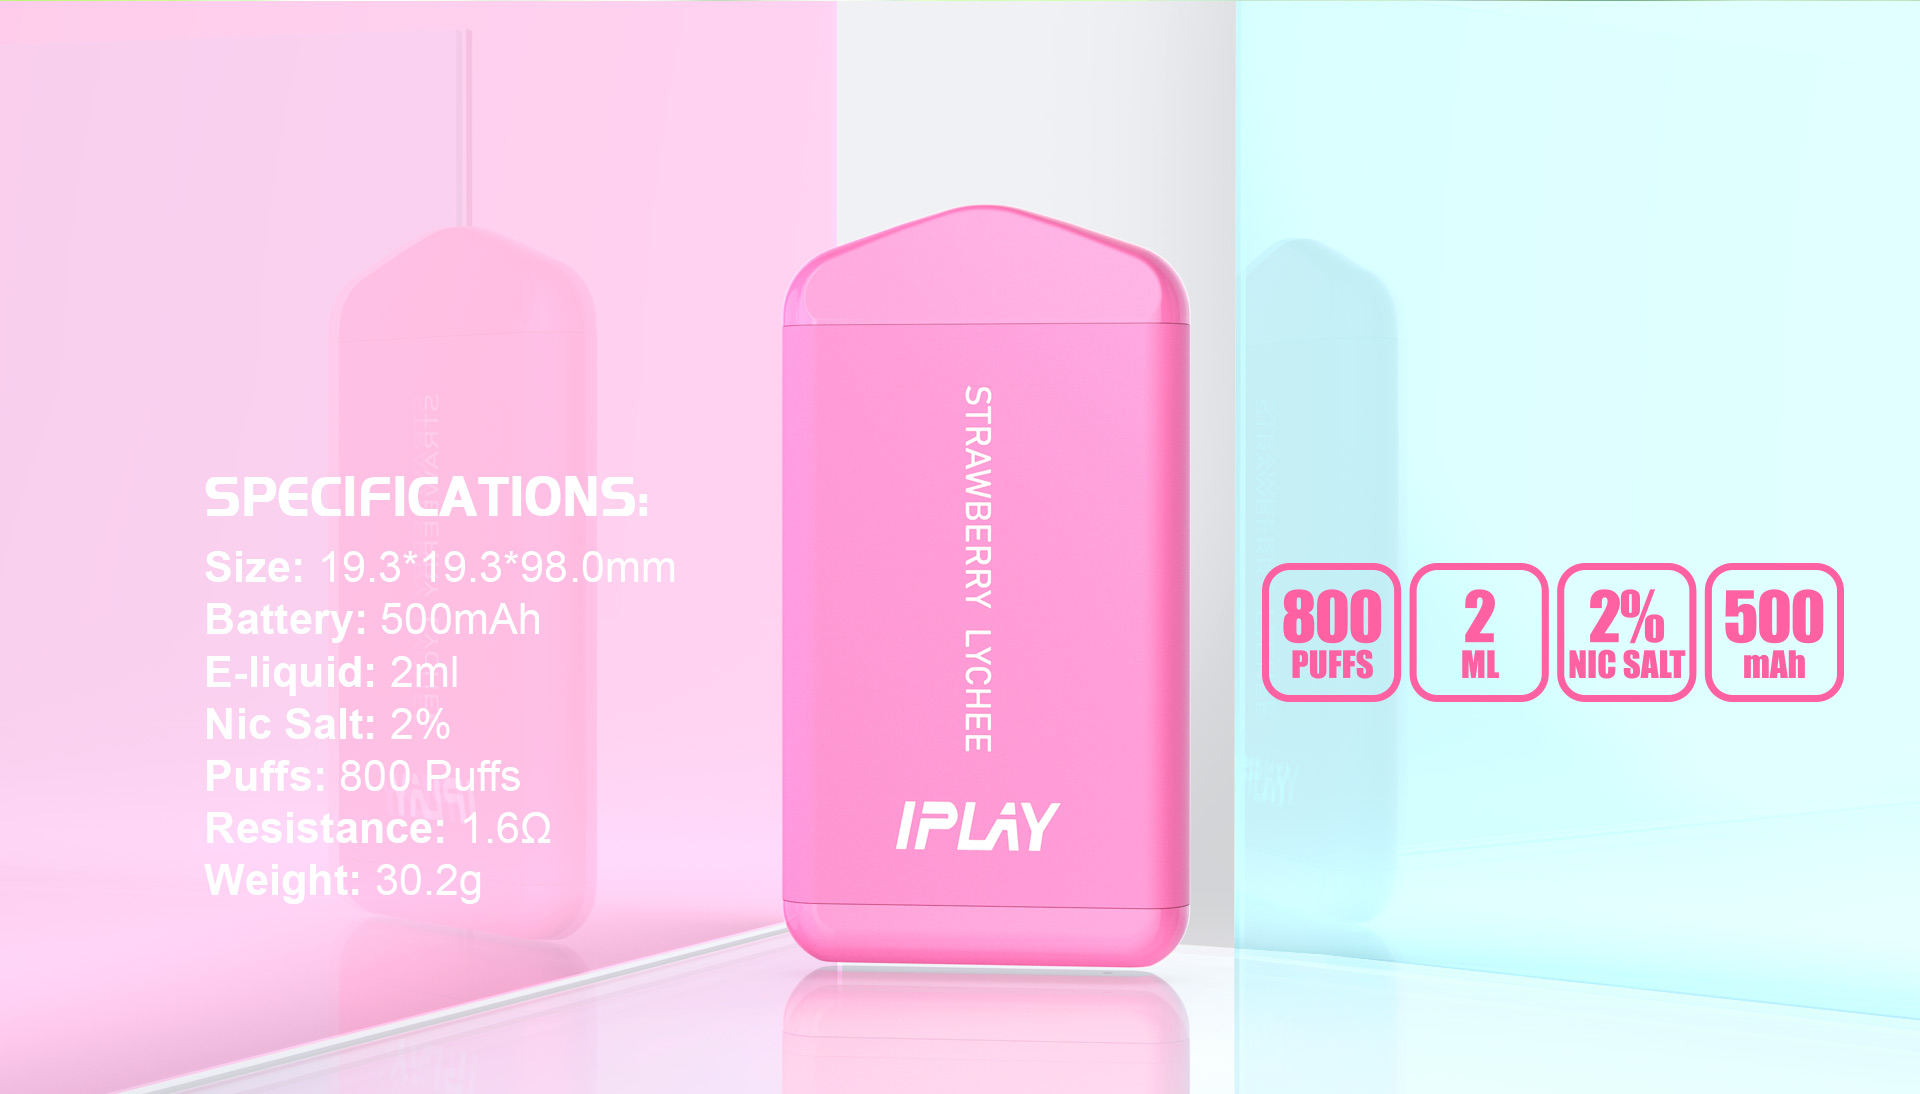 IPLAY AIR 800 - SPECIFICATIONS